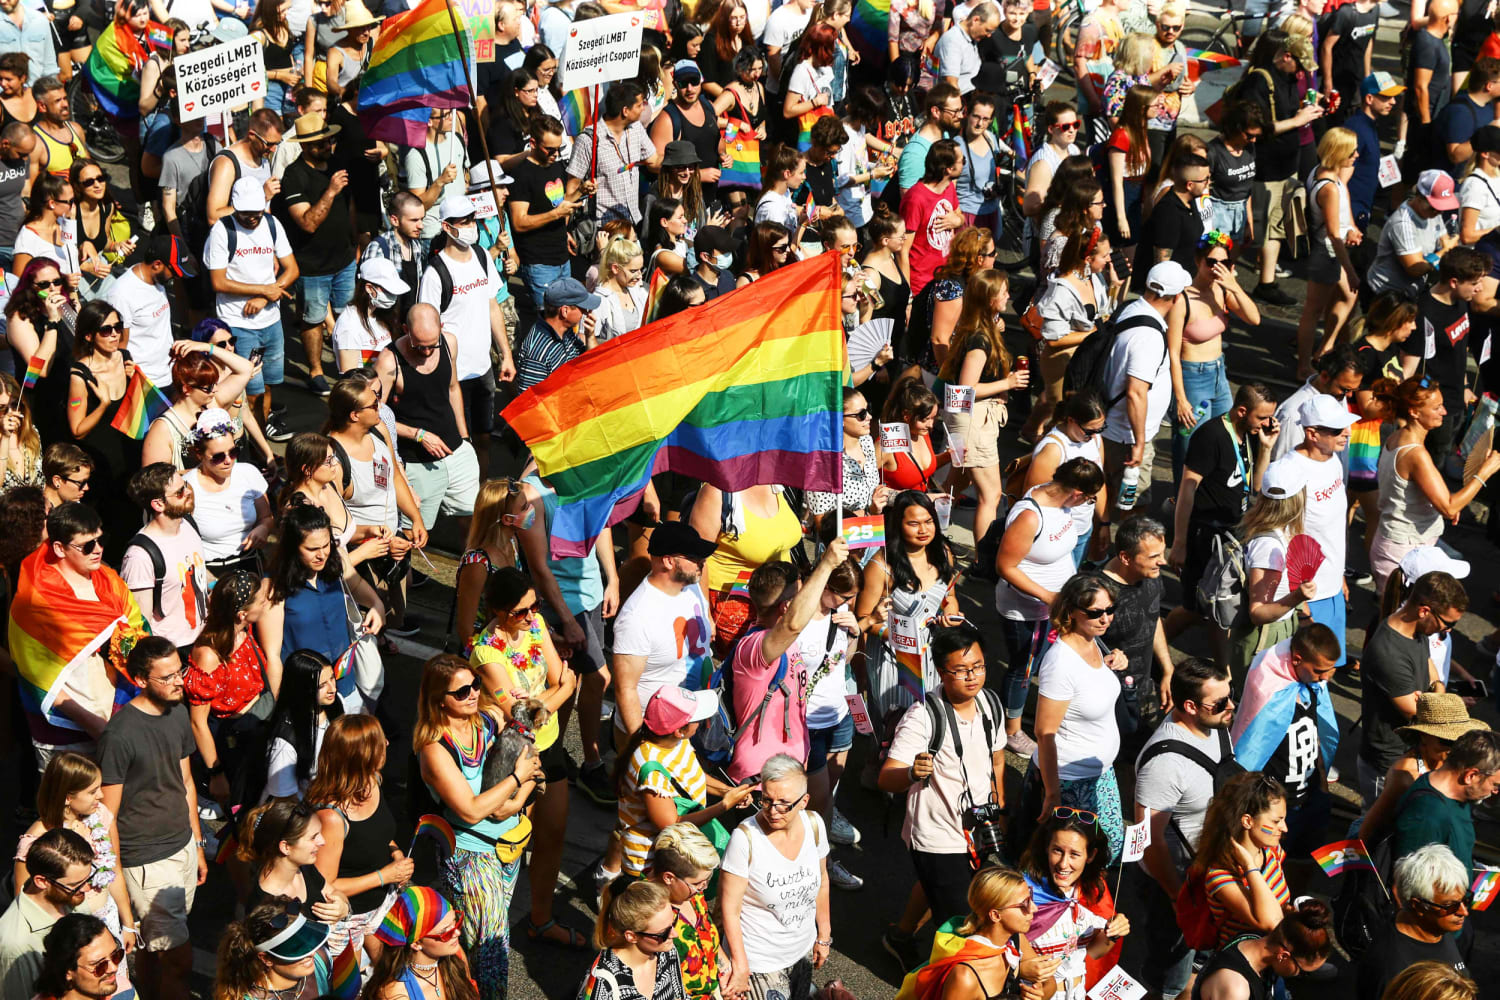 Thousands march in Hungary Pride parade to oppose anti-LGBTQ law